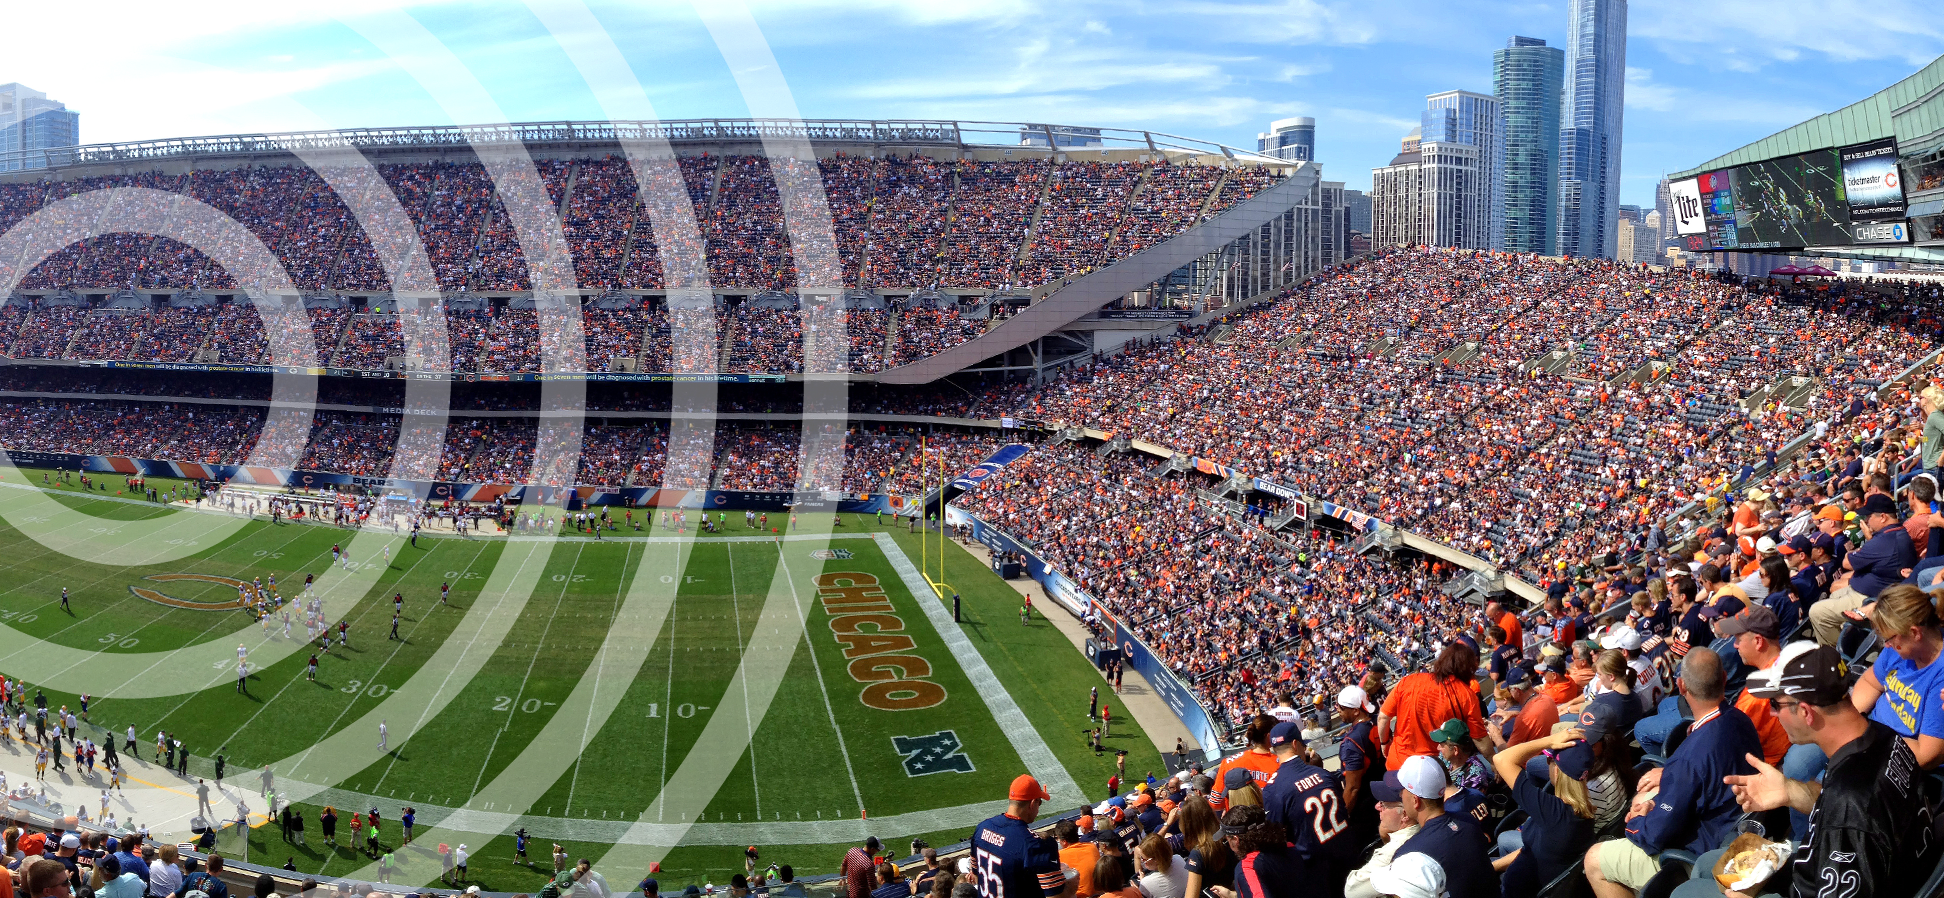 Chicago Bears Parking: Your Guide to Soldier Field Parking